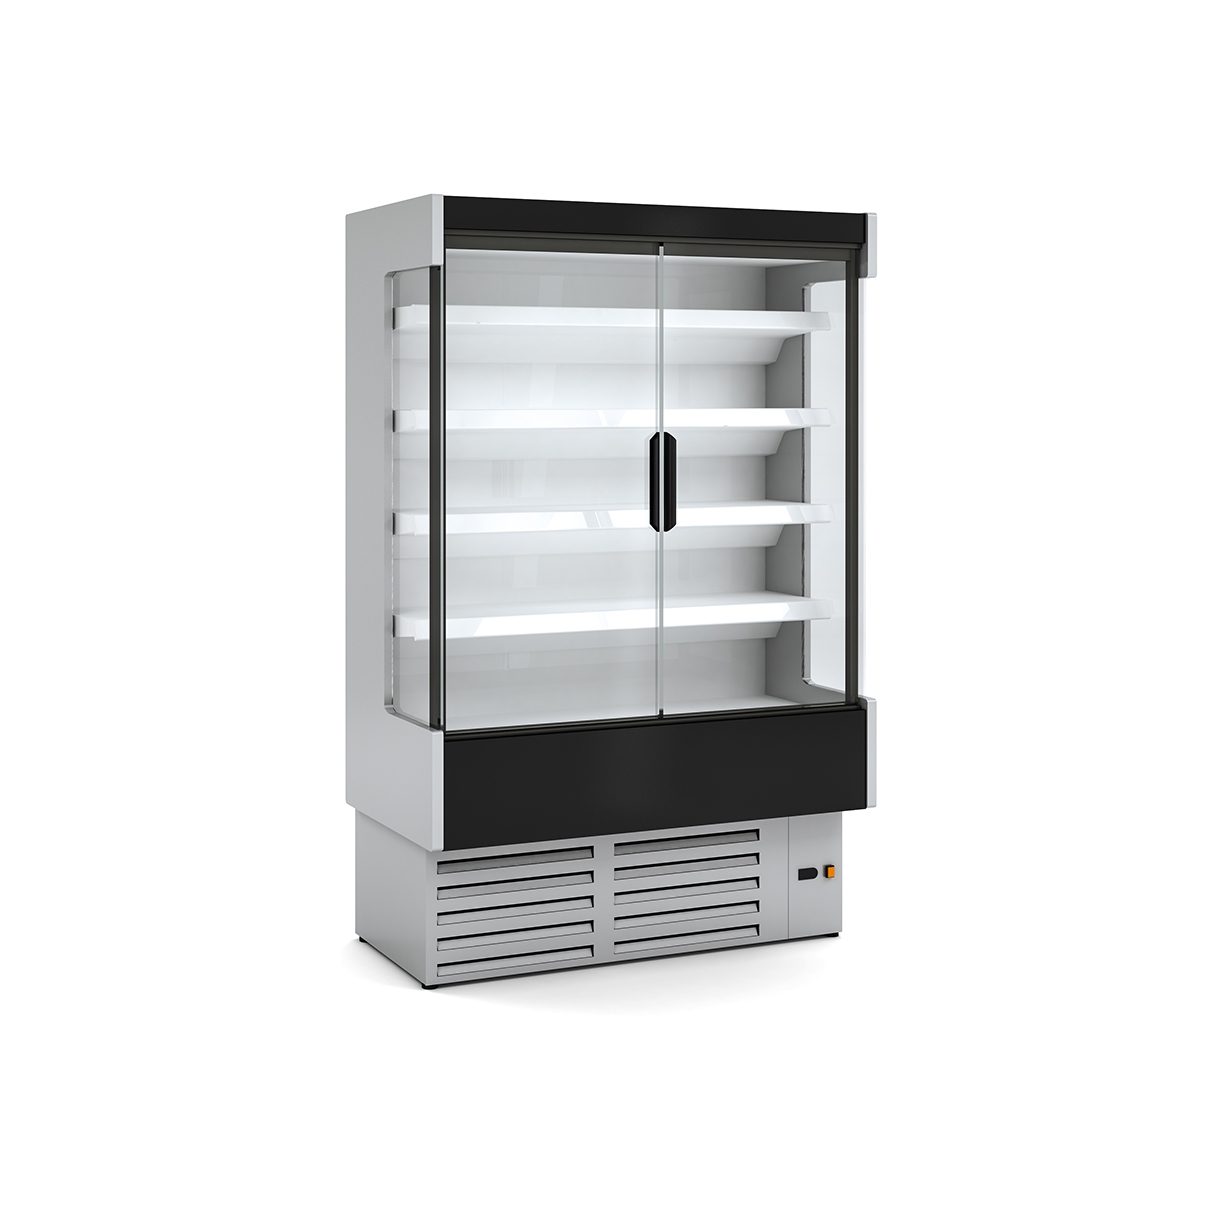 copy of REFRIGERATED WALL-MOUNTED DISPLAY CABINET DG0 M1-M2